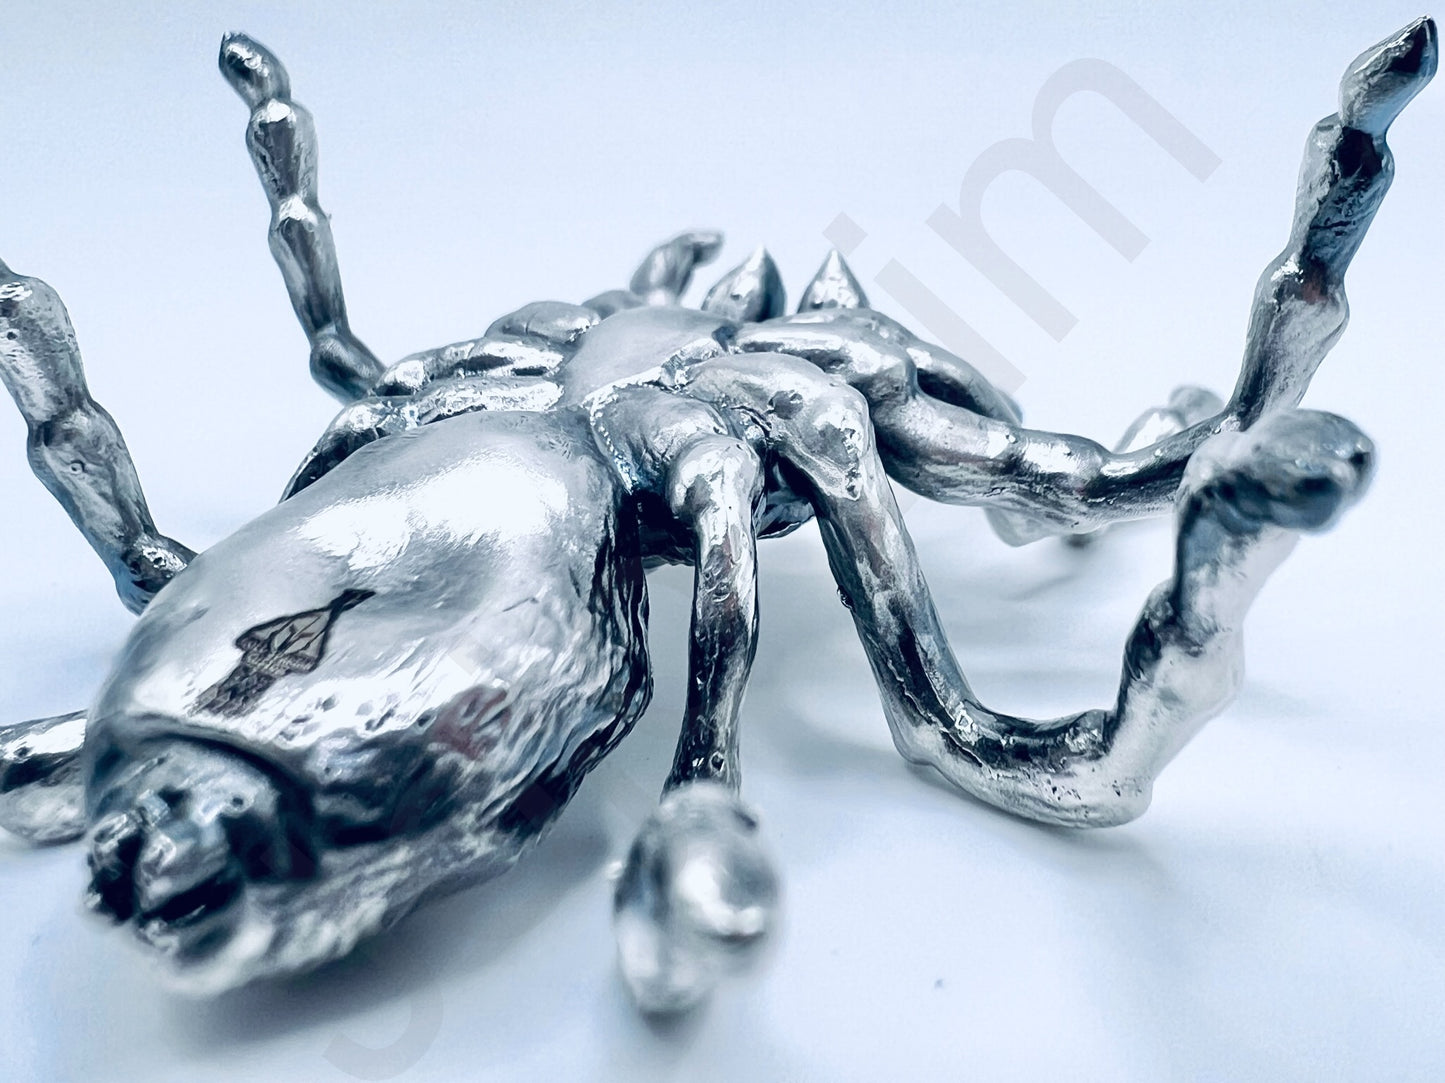 "Tarantula" Spider .999+ Silver Statue, Hand Poured, Investment Casting, Custom Made [LIMITED MINTAGE: 100]